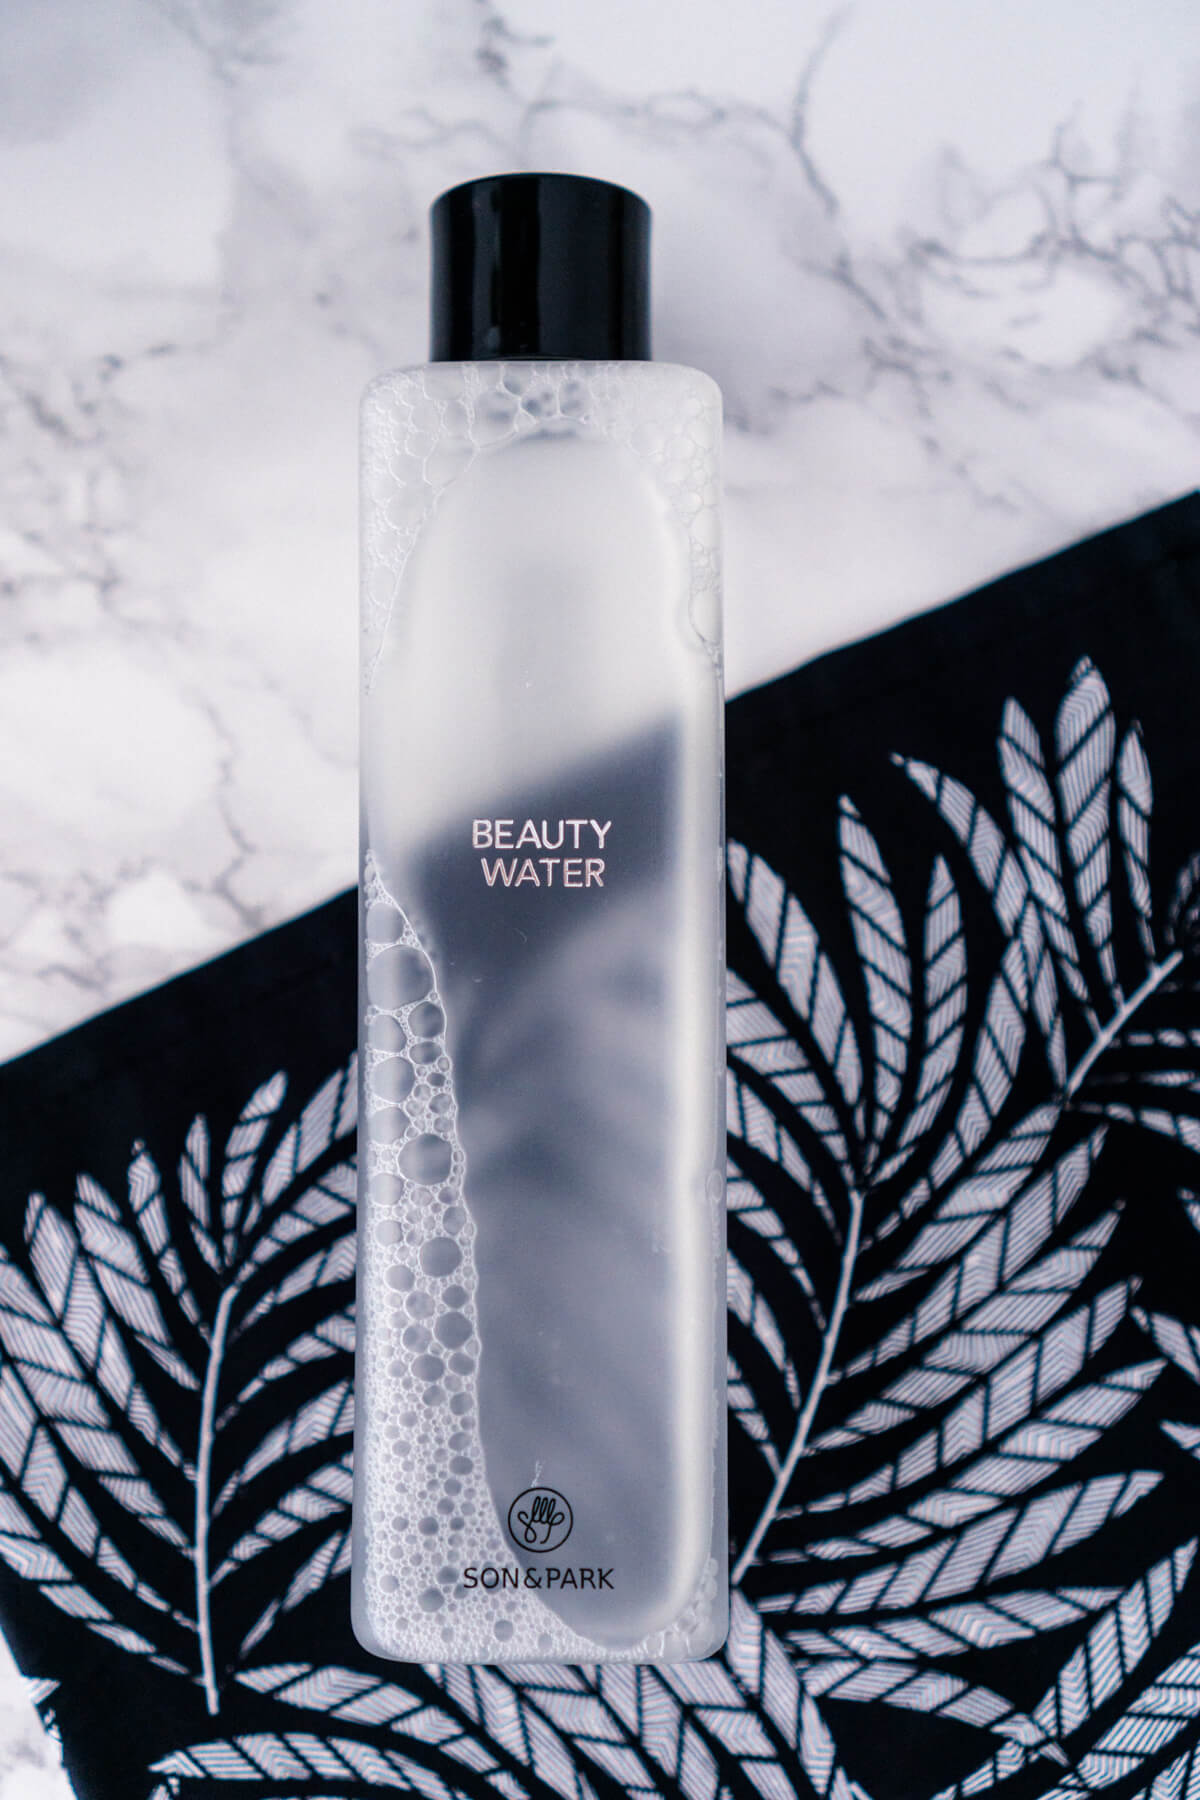 SON & PARK Beauty Water Review